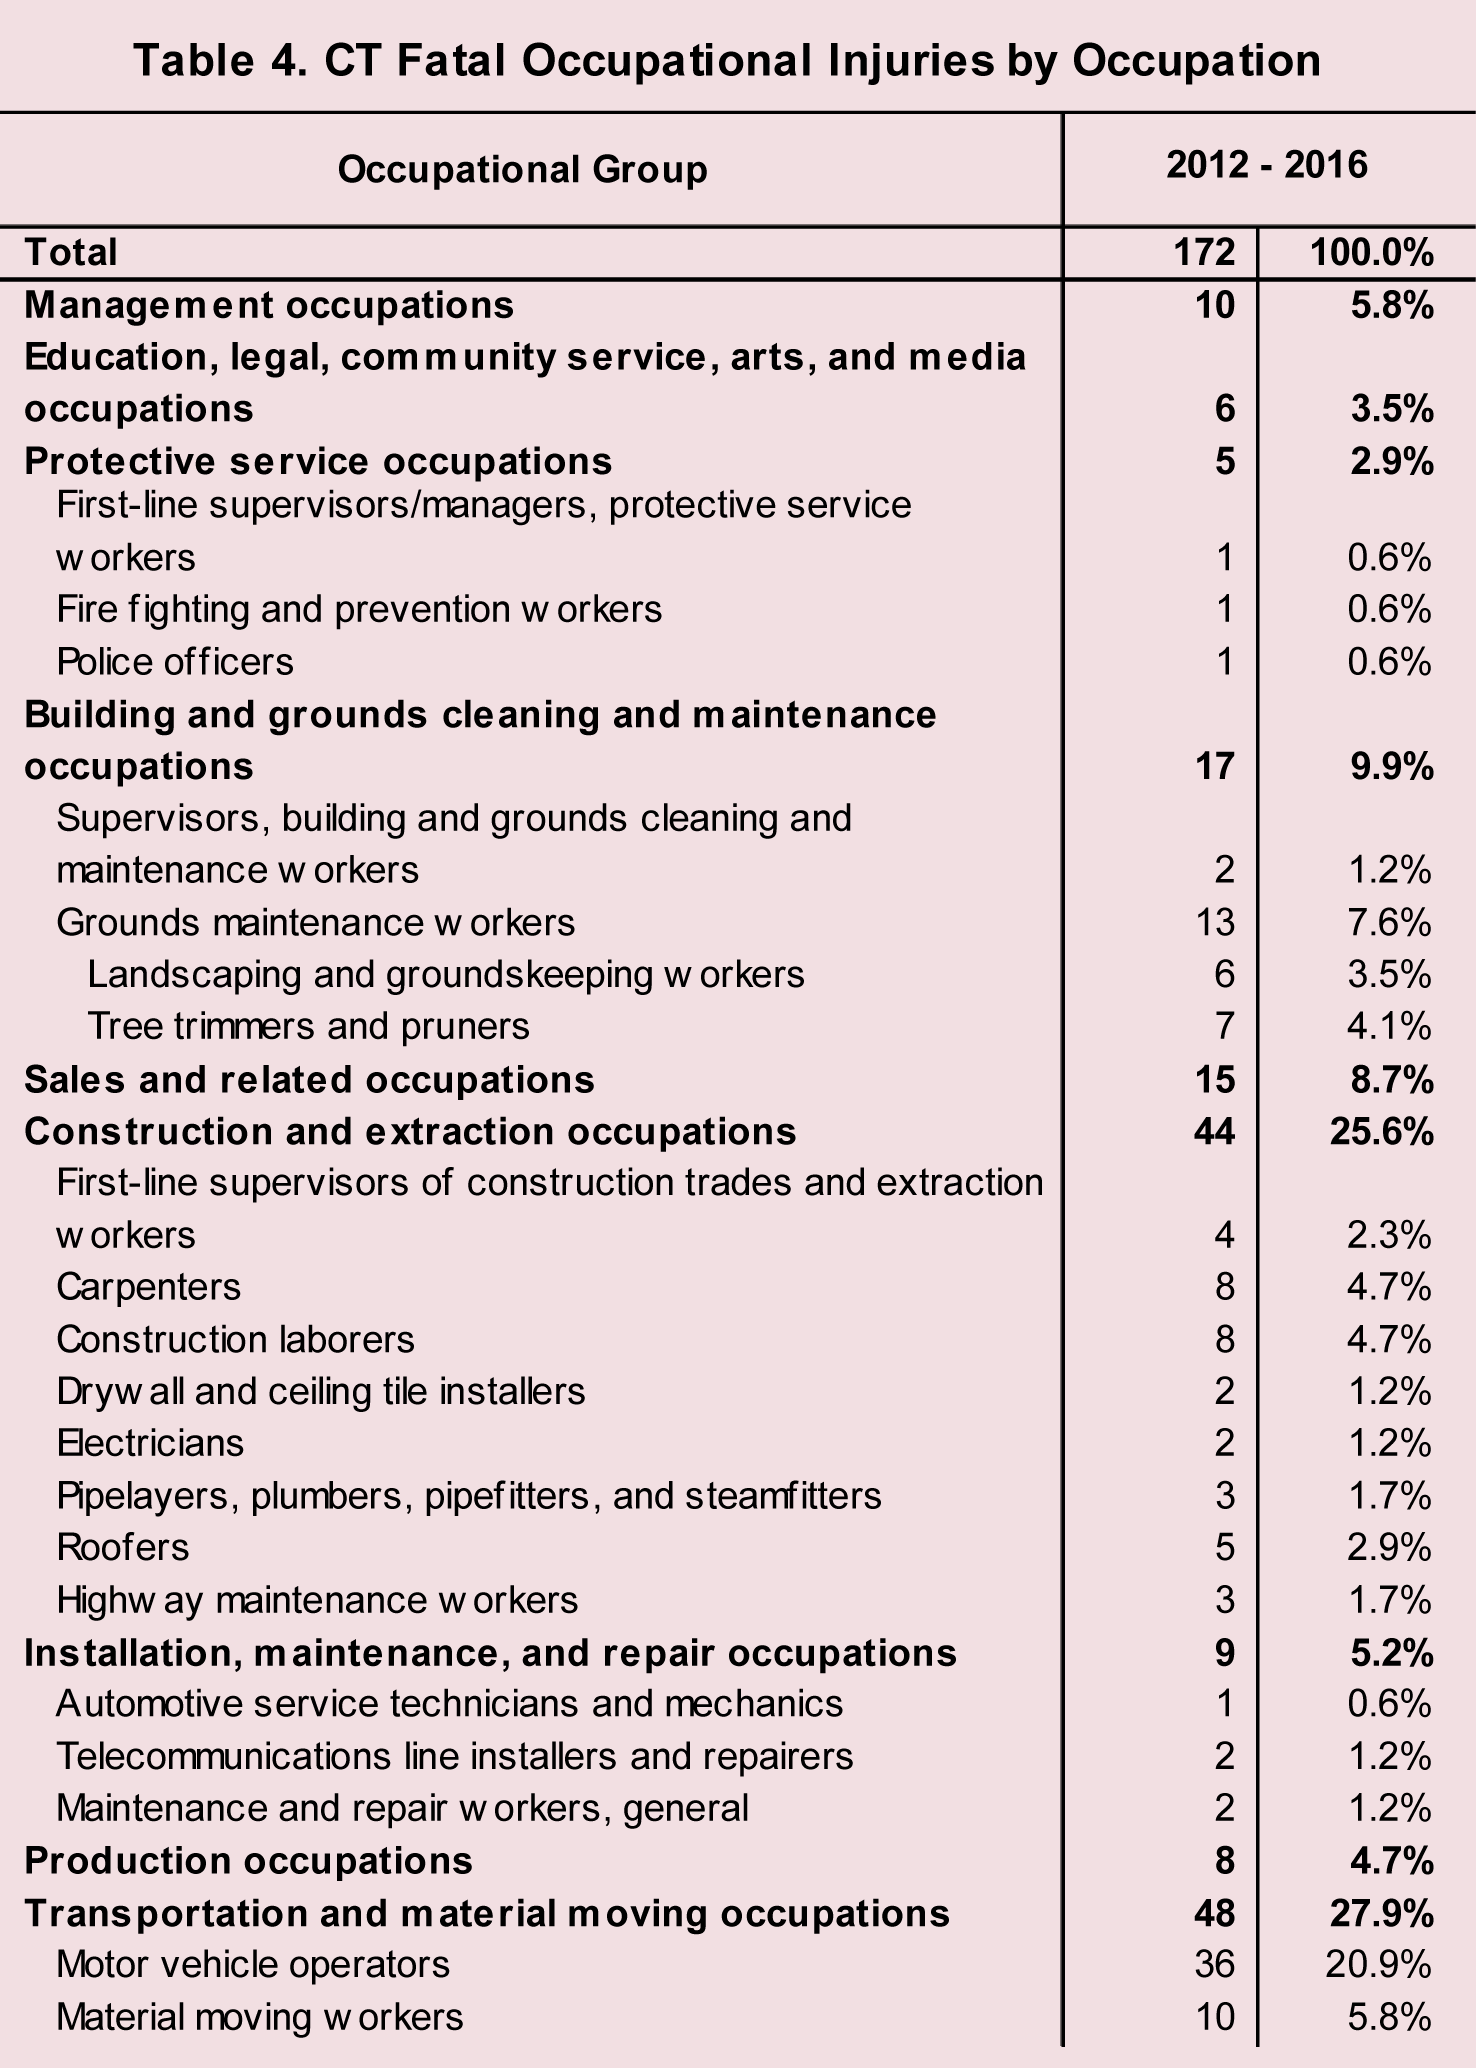 Table 4. CT Fatal Occupational Injuries by Occupation